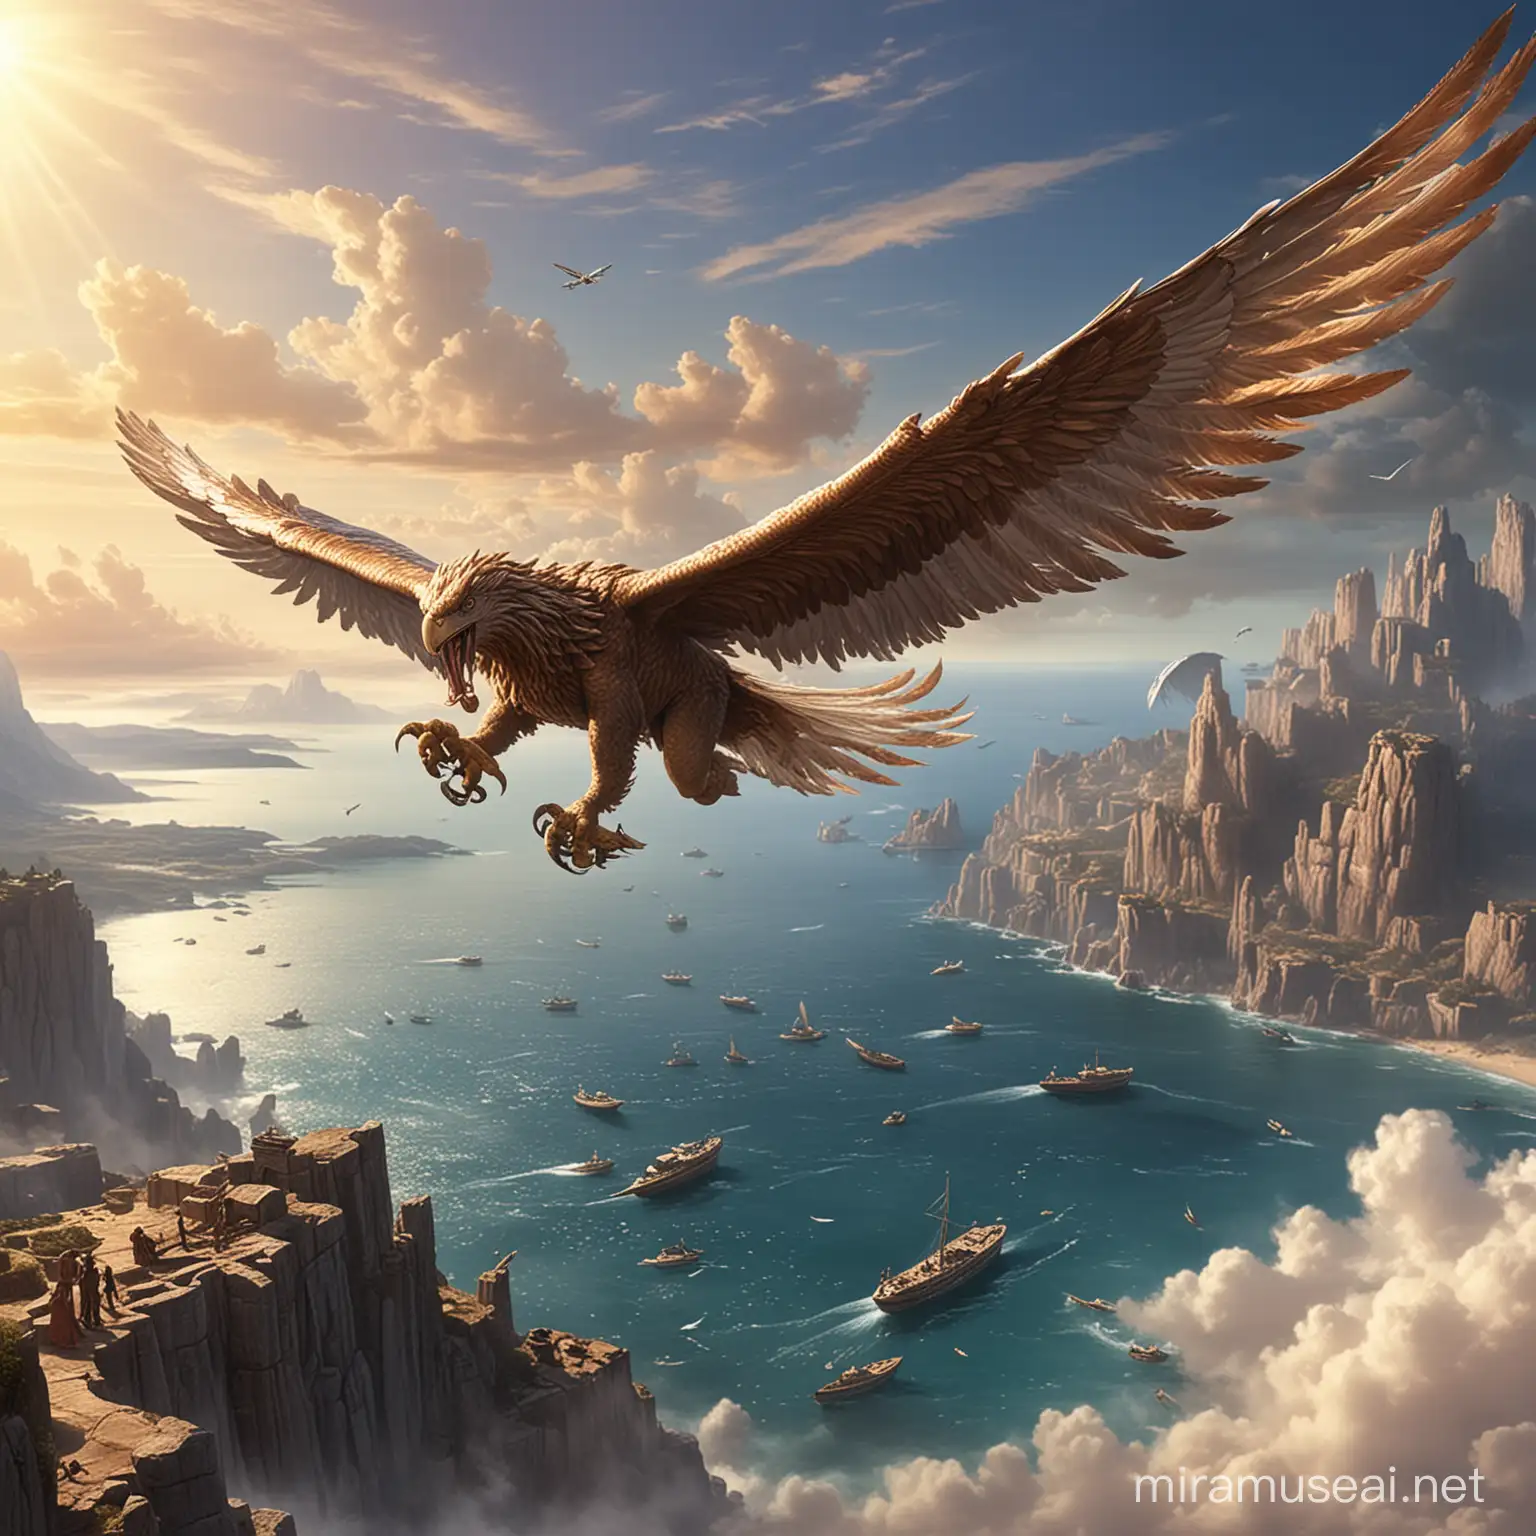 Icarus Soaring Towards the Sun in Mythical Flight